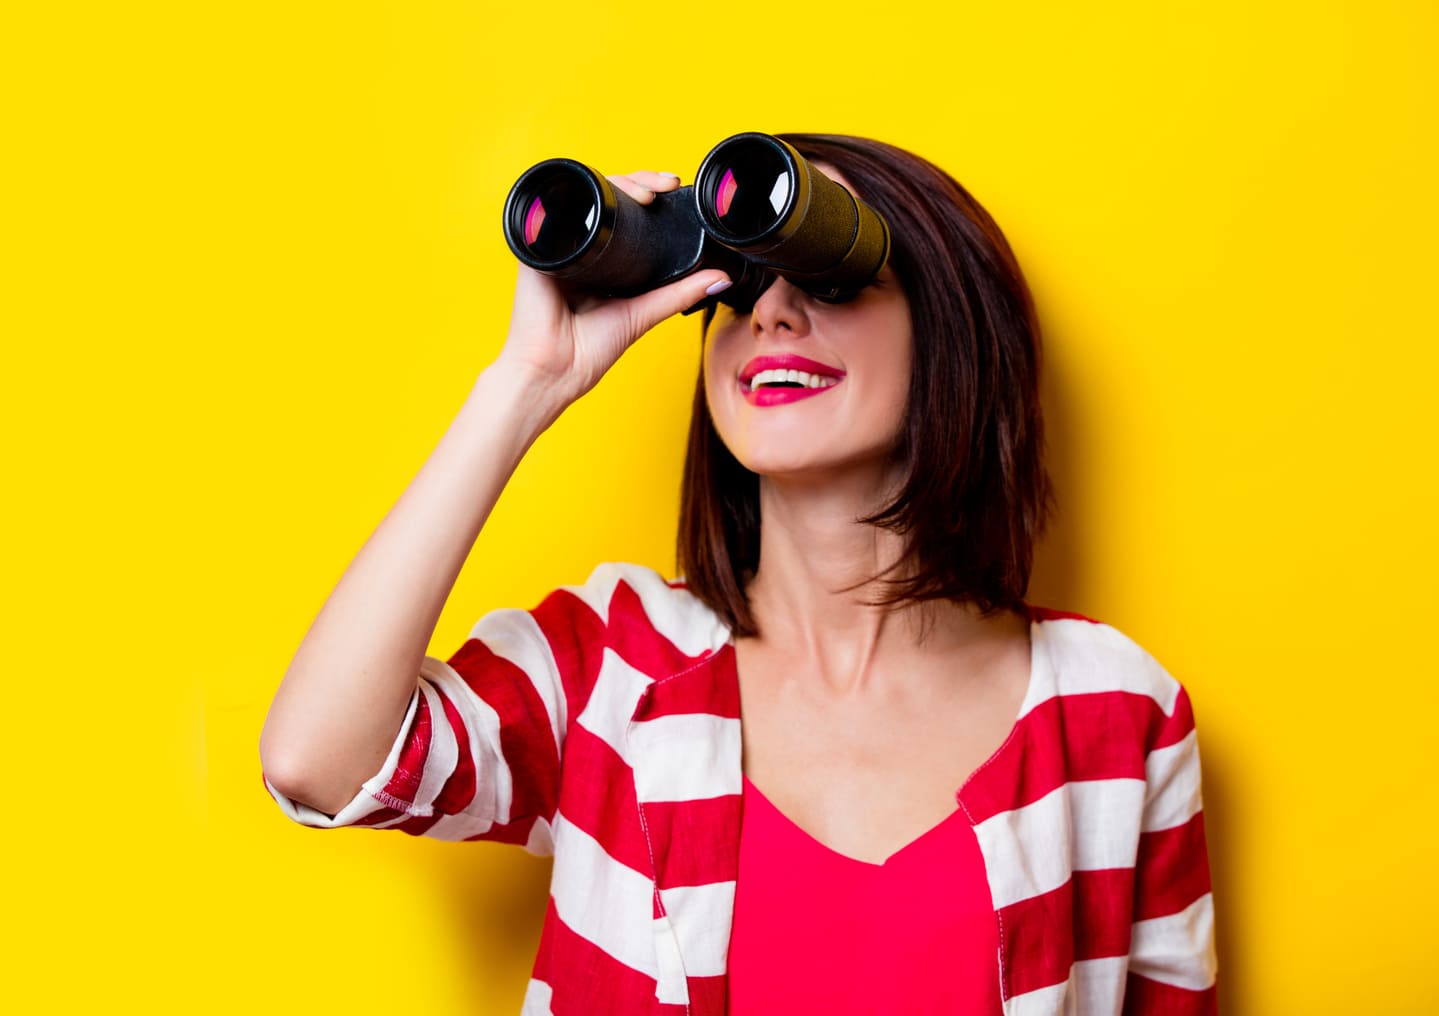 Young woman with binocular, yellow backgroung